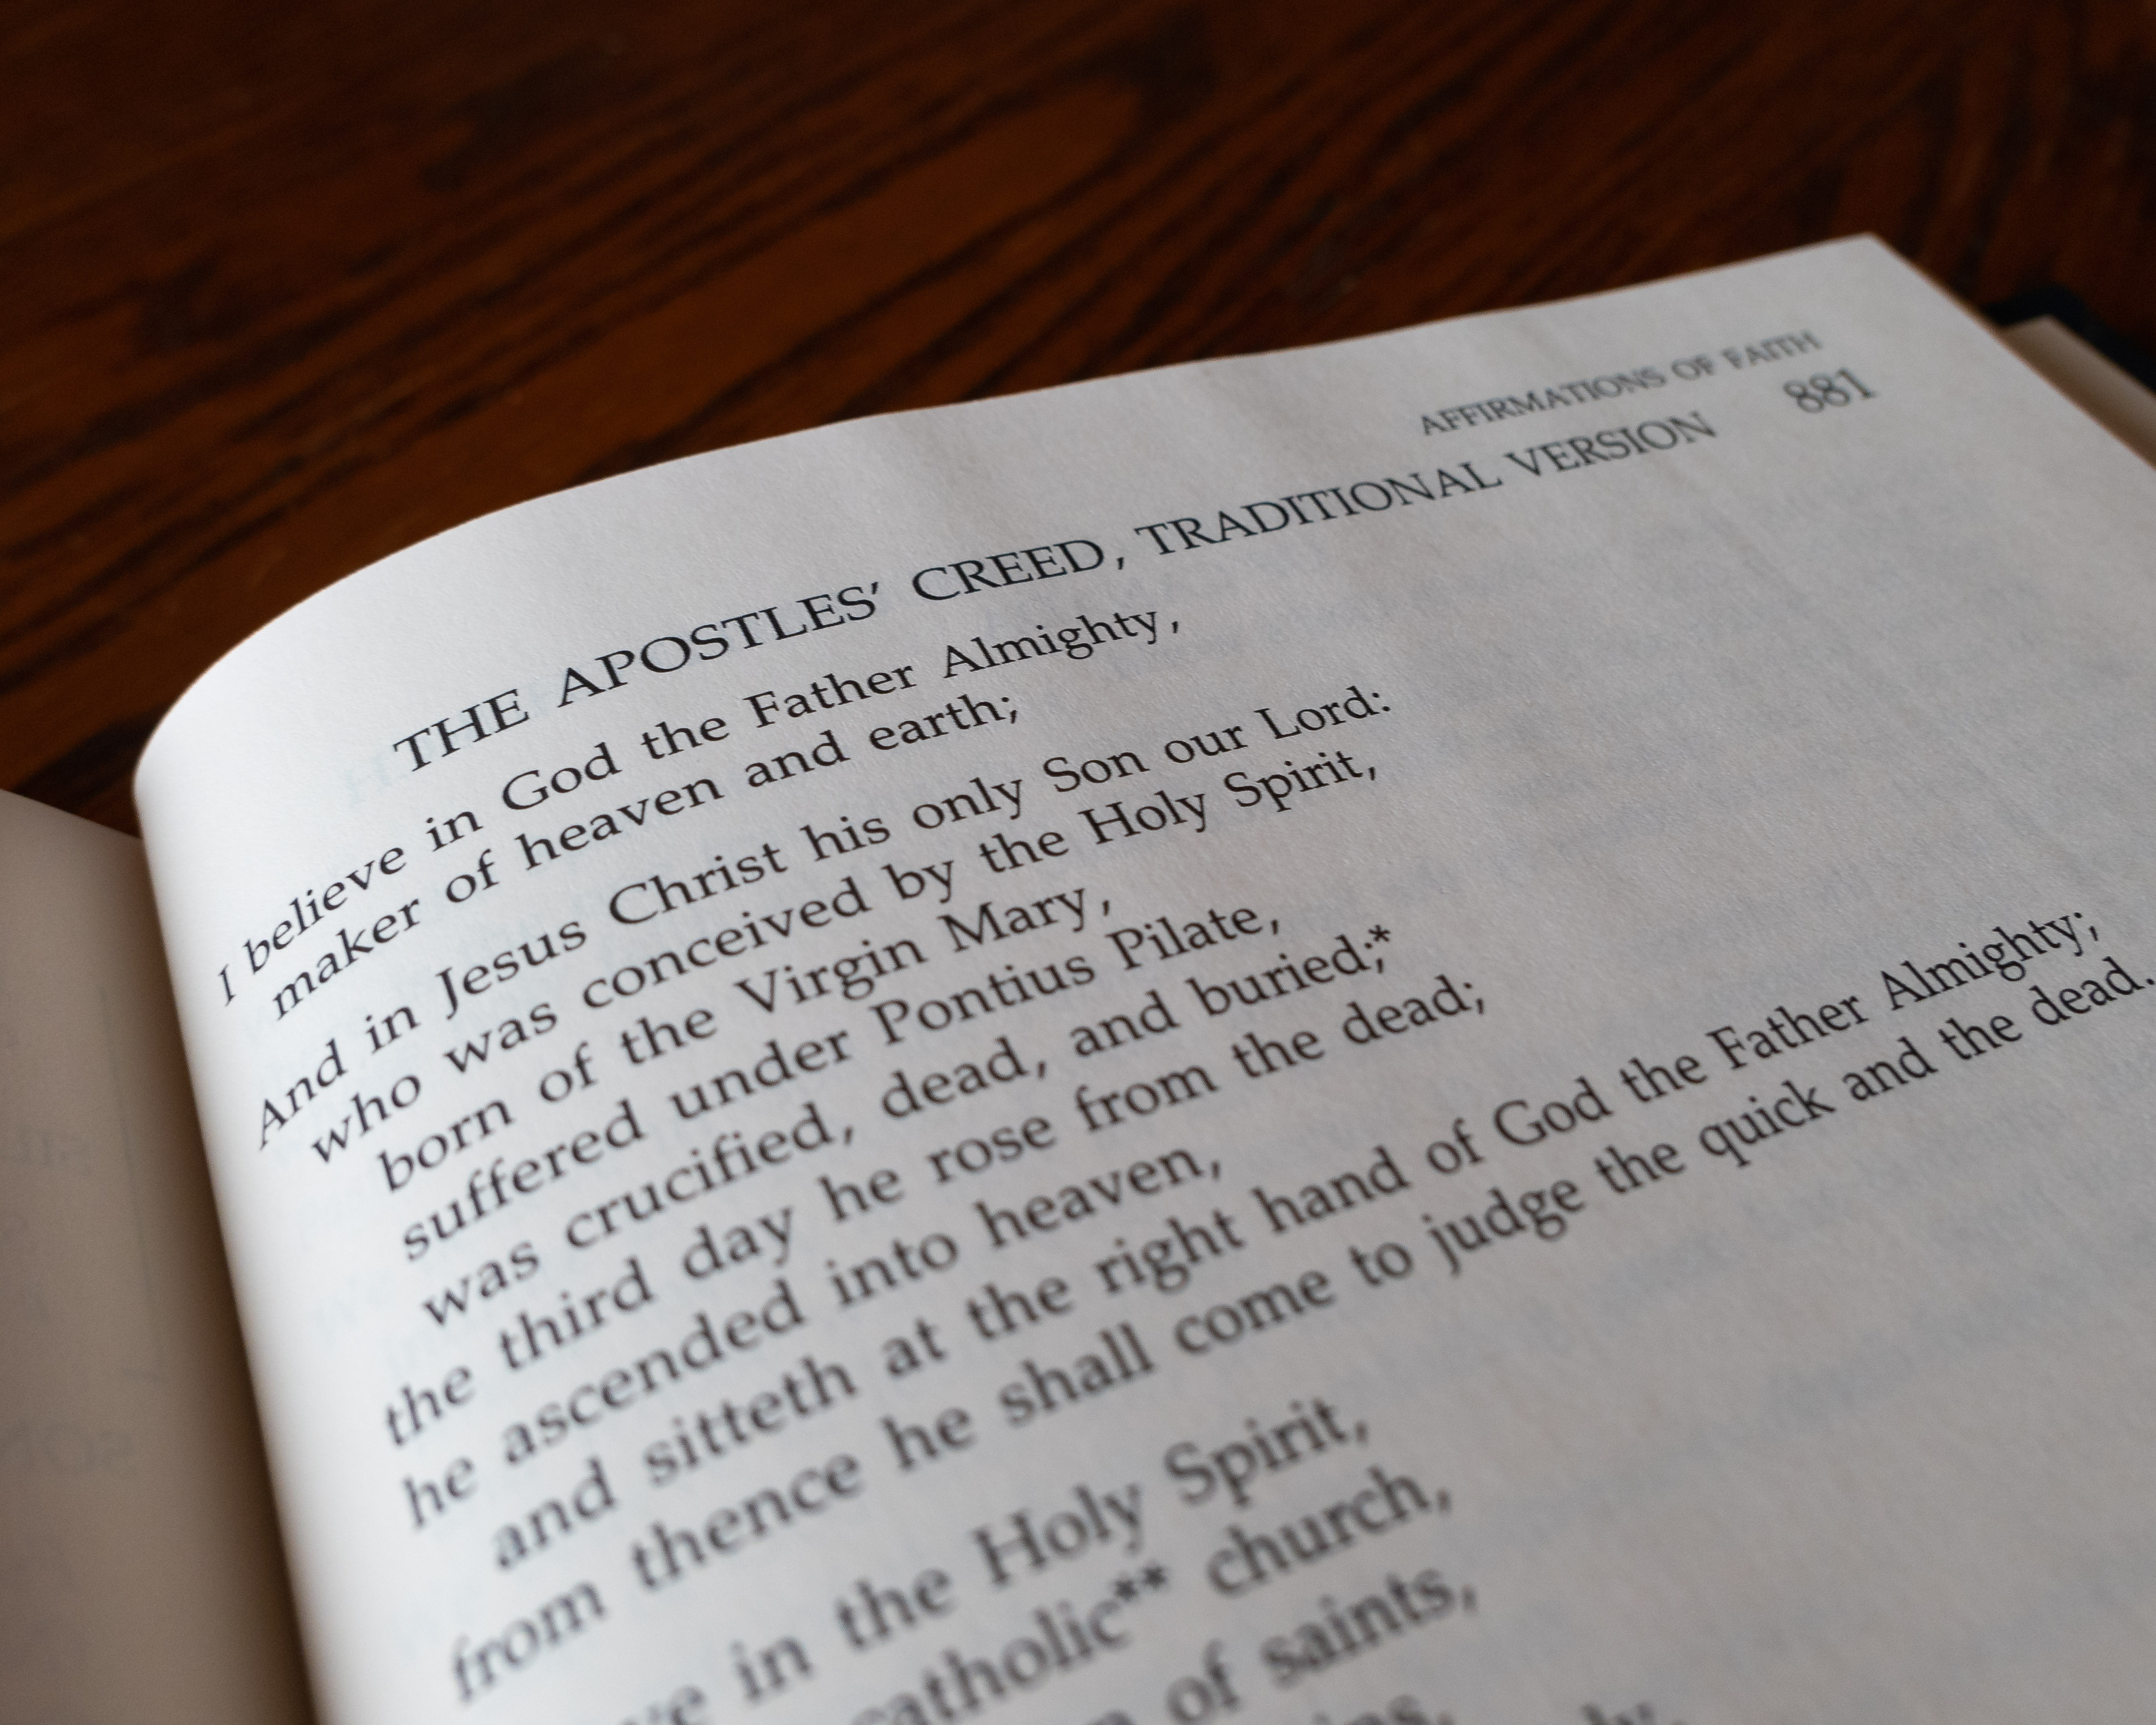 The Apostle’s Creed: The Forgivness of Sins